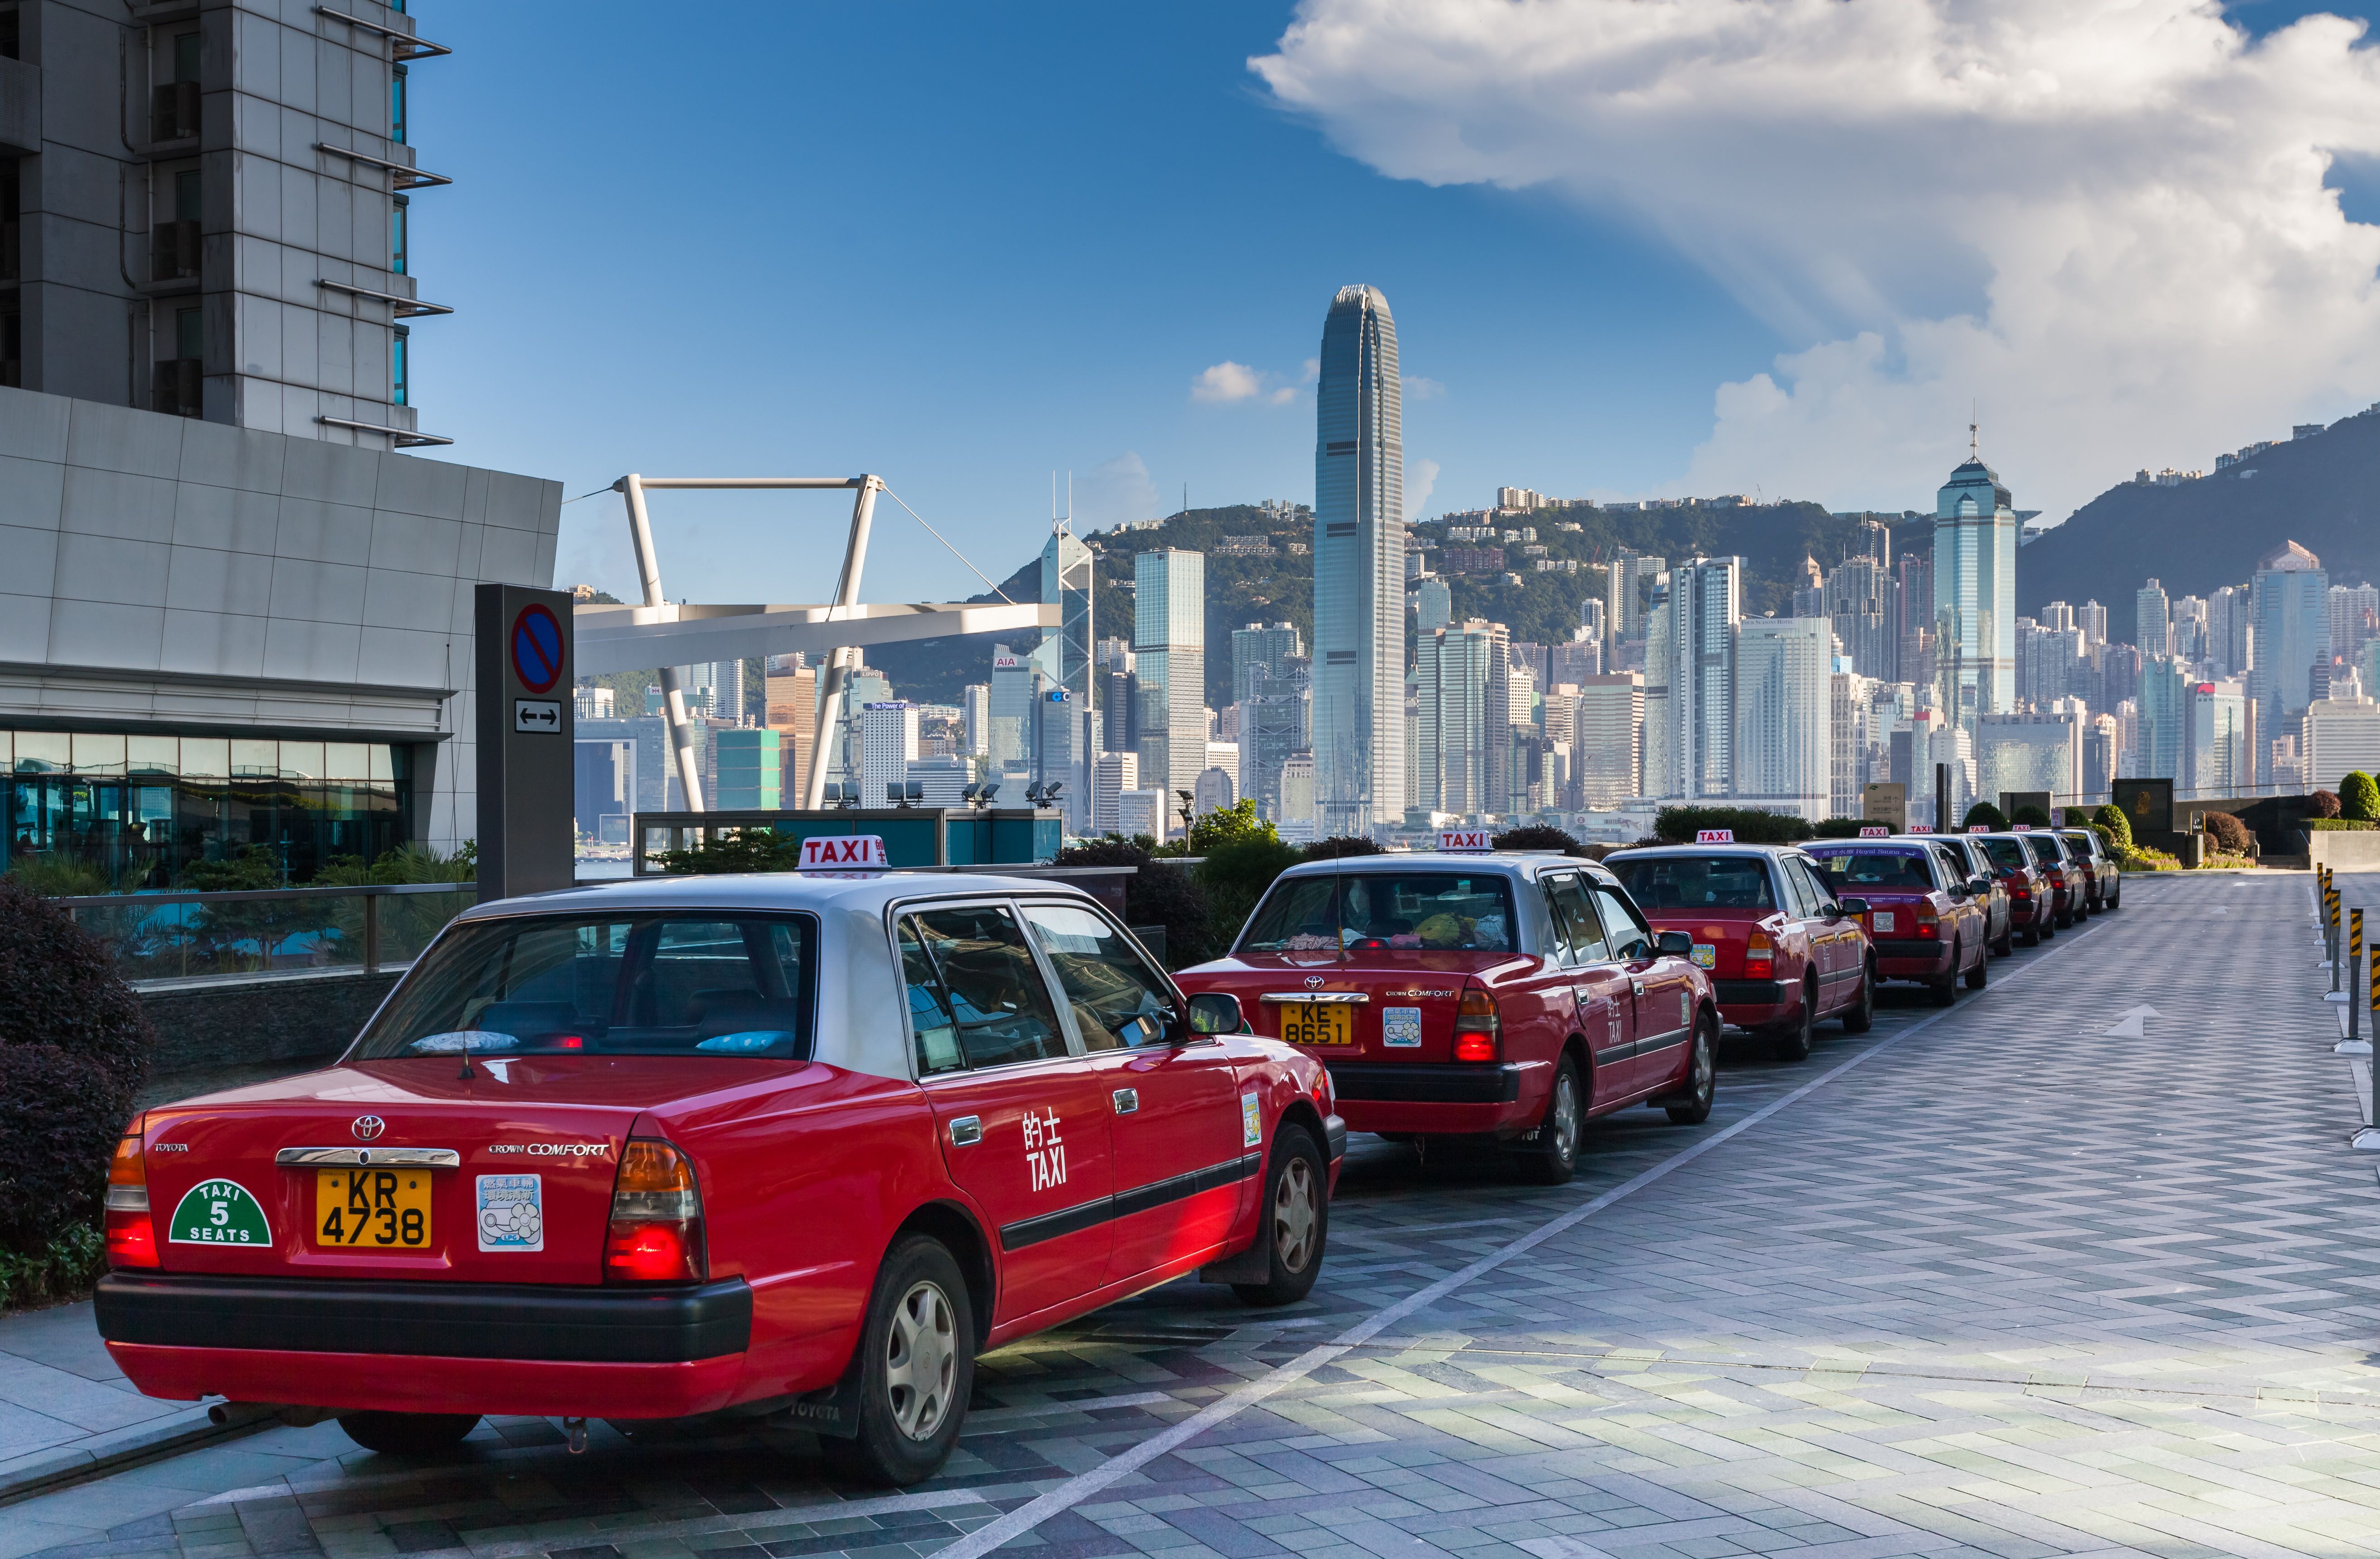 Taxi Talk: How do Hong Kong's red cab drivers feel about the Uber